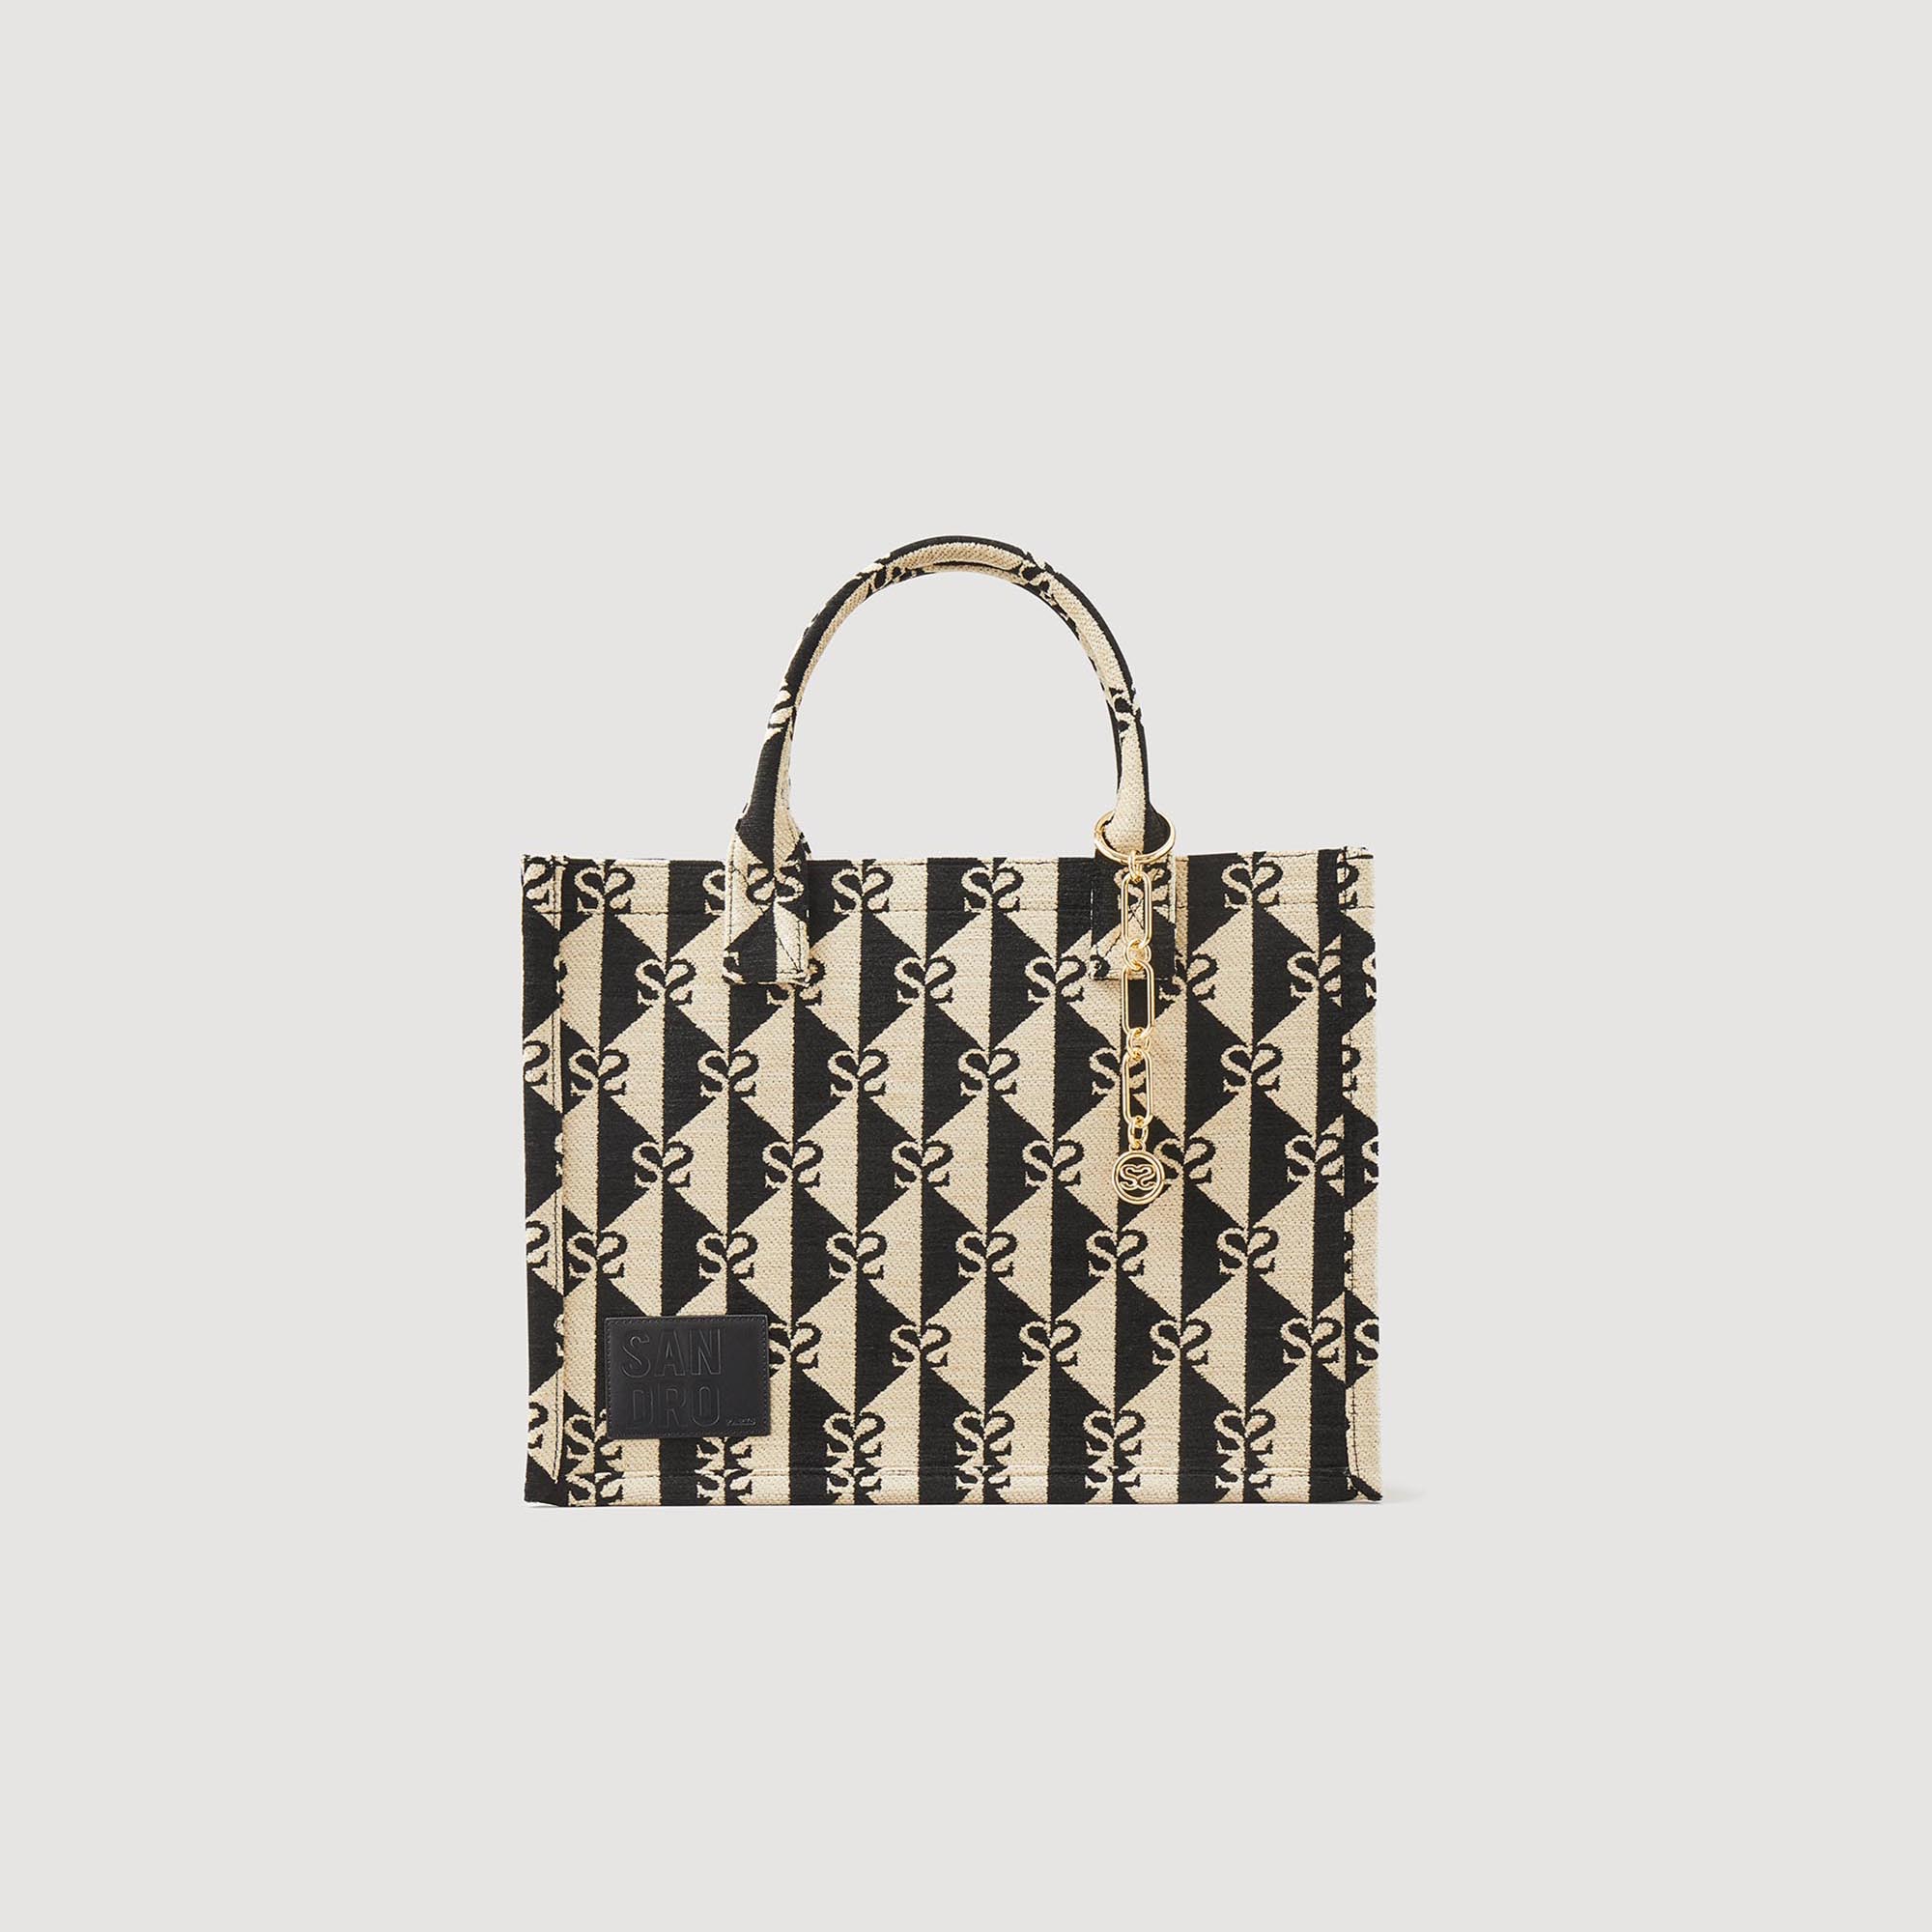 Sandro acrylic Large tweed tote bag with double S pattern, handles, magnetic clasp and removable jewellery chain